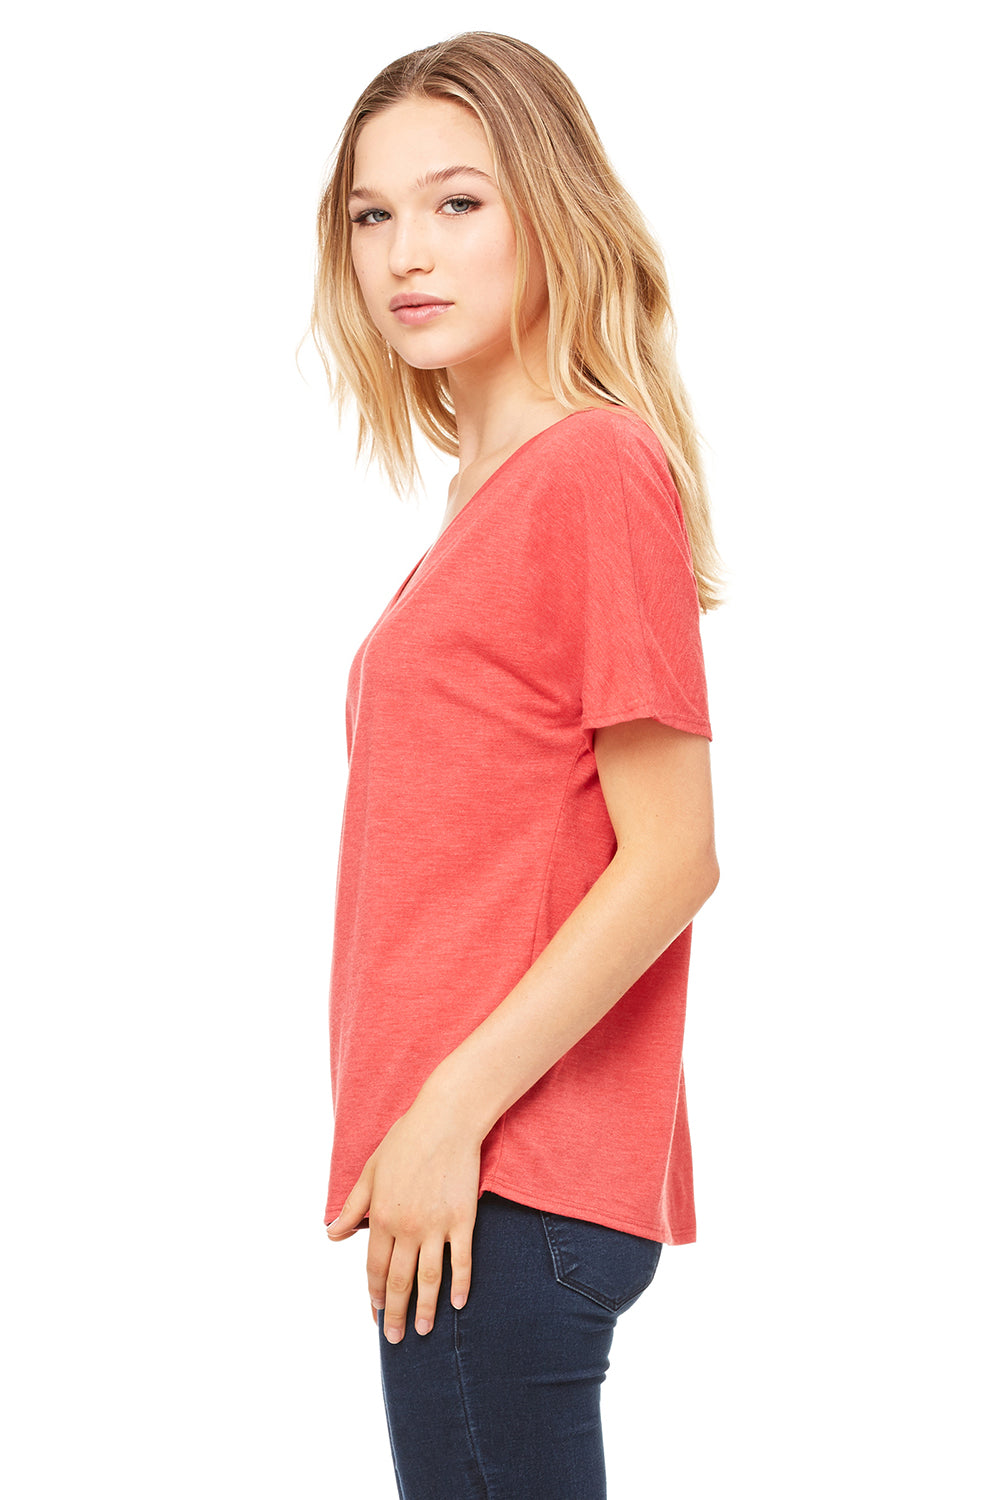 Bella + Canvas 8815 Womens Slouchy Short Sleeve V-Neck T-Shirt Red Triblend Model Side